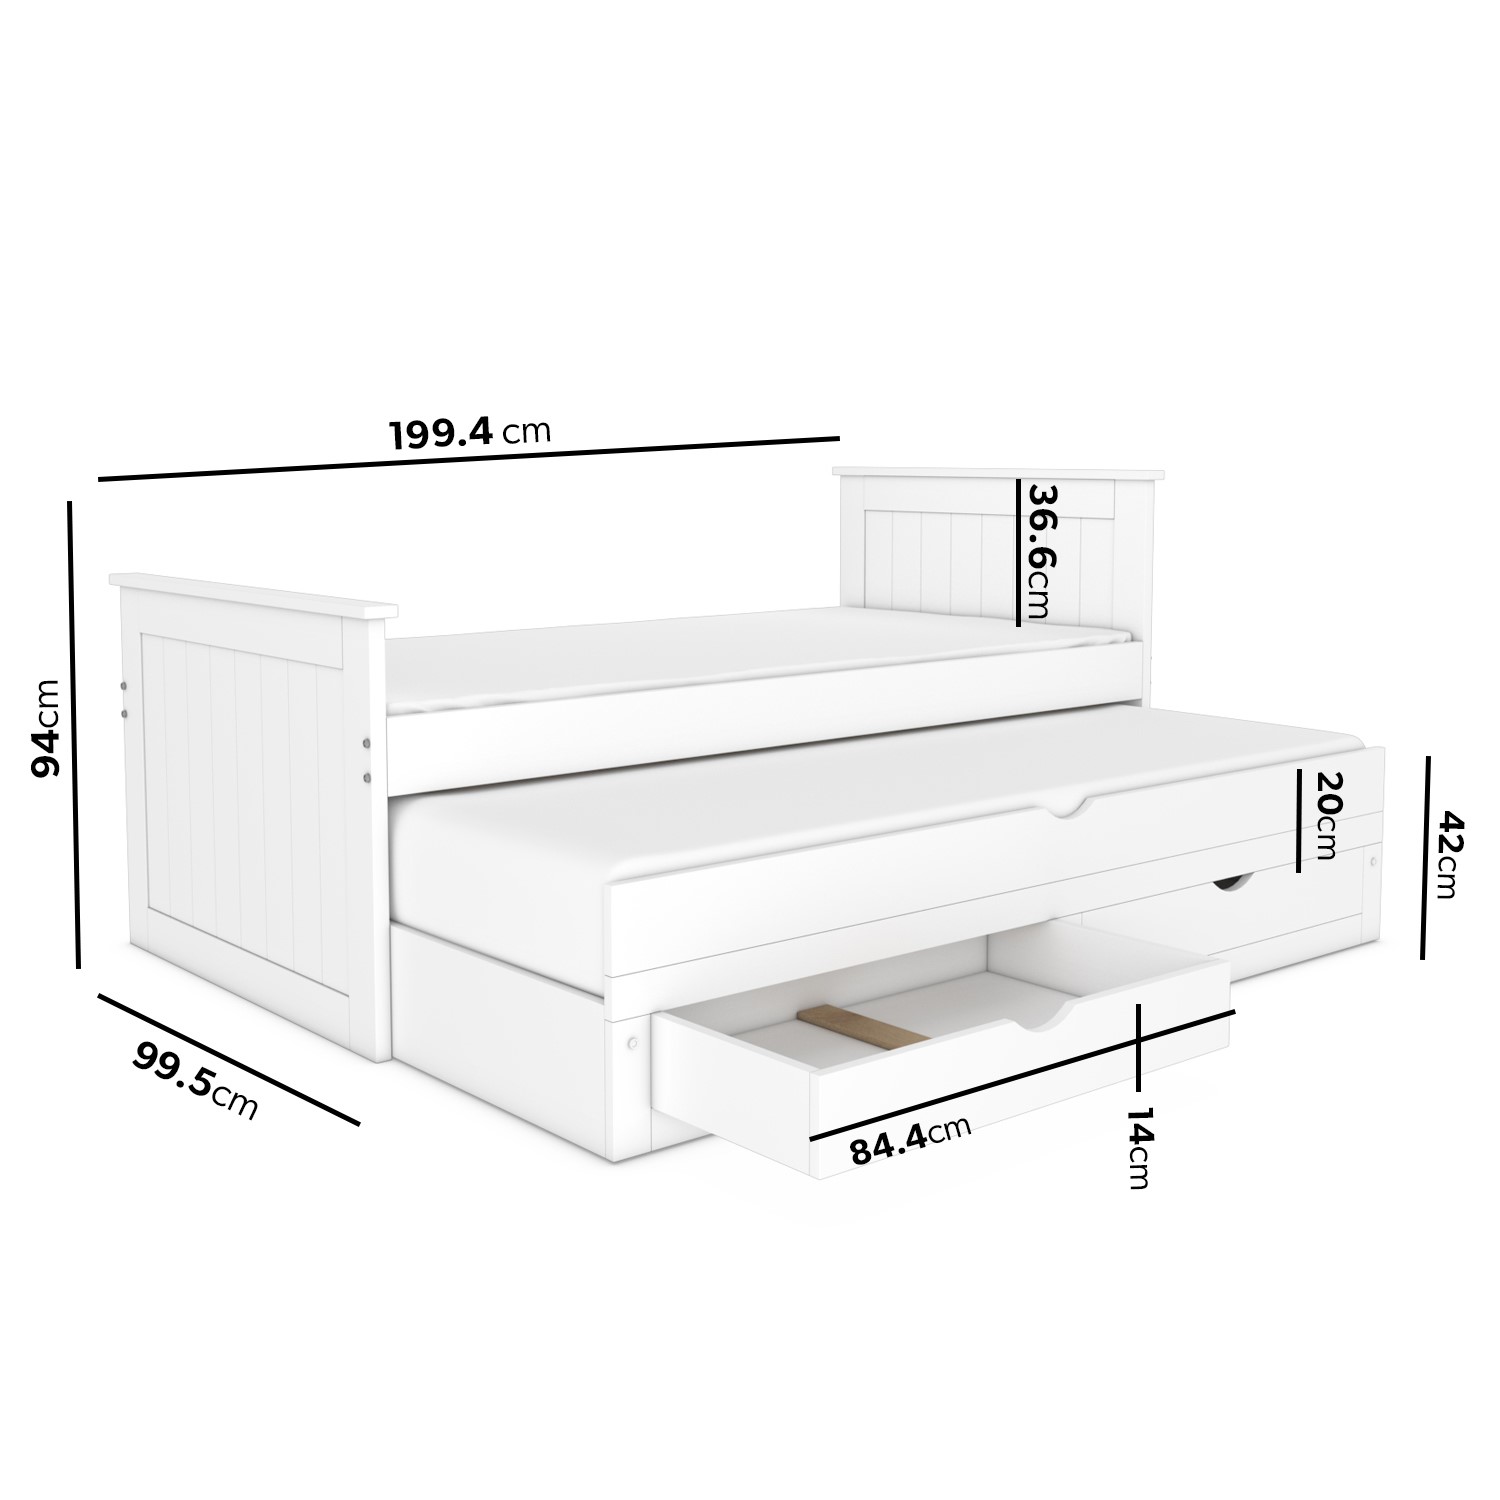 Guest Bed With Storage Drawers, White King Size Bed With Storage Drawers